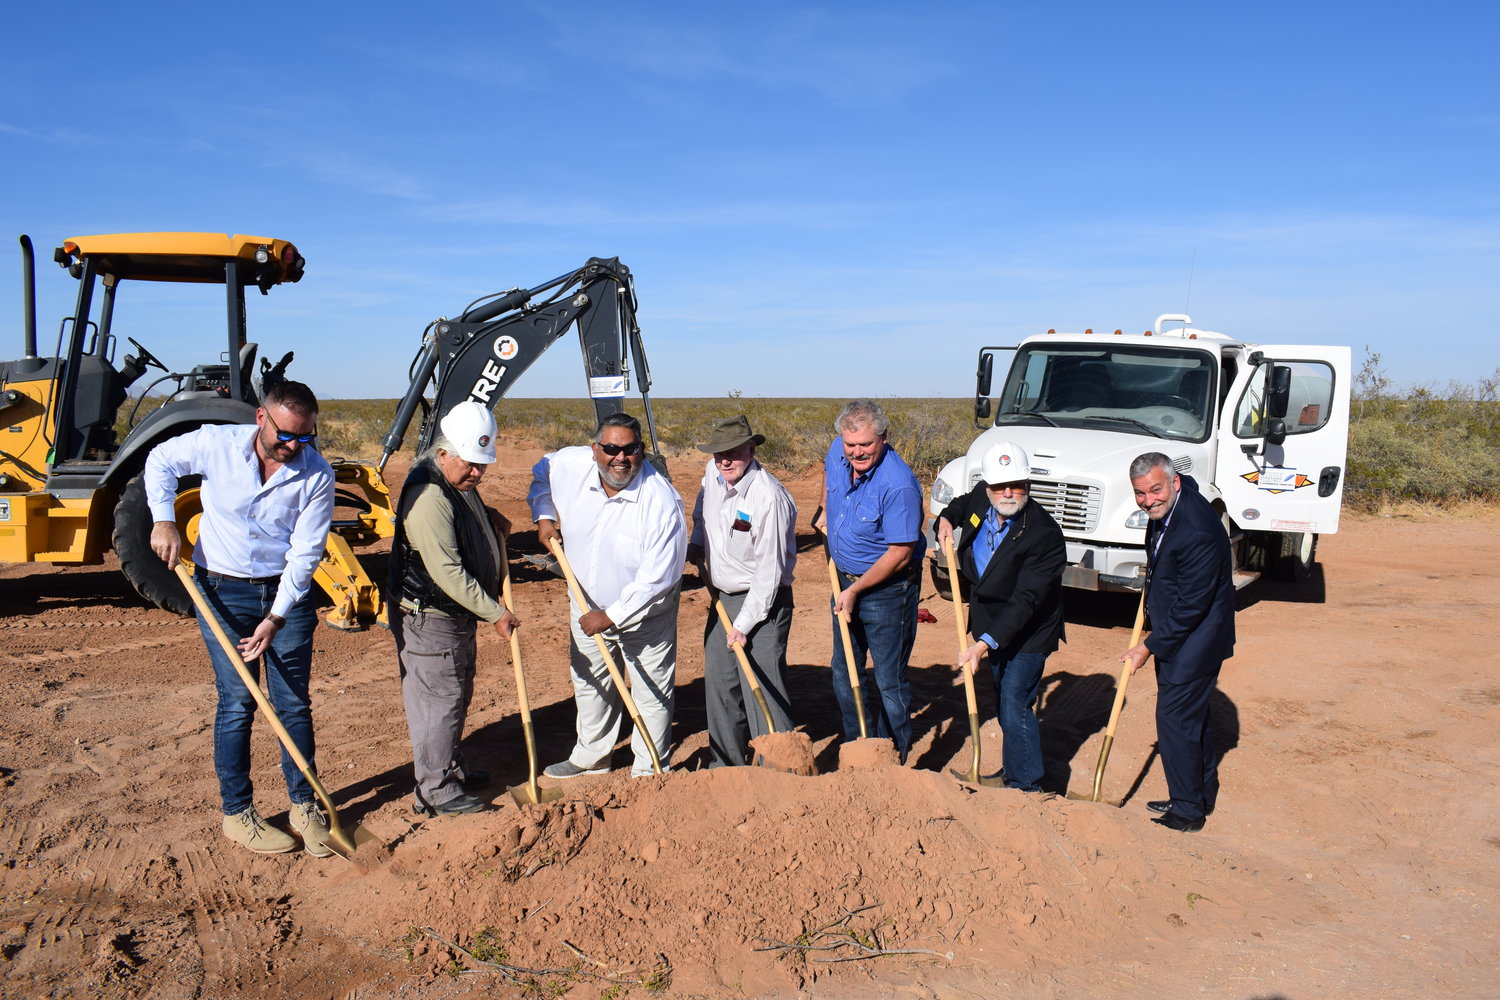 Left to right at the Nov. 19 BMX pump track groundbreaking in Chaparral, New Mexico are, left to right, Sam Askar of Global Maven Enterprises construction company of Las Cruces, the project’s general contractor; Ray Aldaz, a community advocate and member of the Chaparral Community Development Association (CCDA); State Rep. Willie Madrid, state representative, District 53, D-Doña Ana, Otero counties; Lake Section Water Company of Chaparral owner John Colquitt; CCDA member Alex Wright, who is the son of former state Rep. Delores C. Wright, who represented Doña Ana County (District 52) in the New Mexico House of Representatives, 1993-2001; Doña Ana County Commissioner Shannon Reynolds; and Doña Ana County Assistant Manager Chuck McMahon.